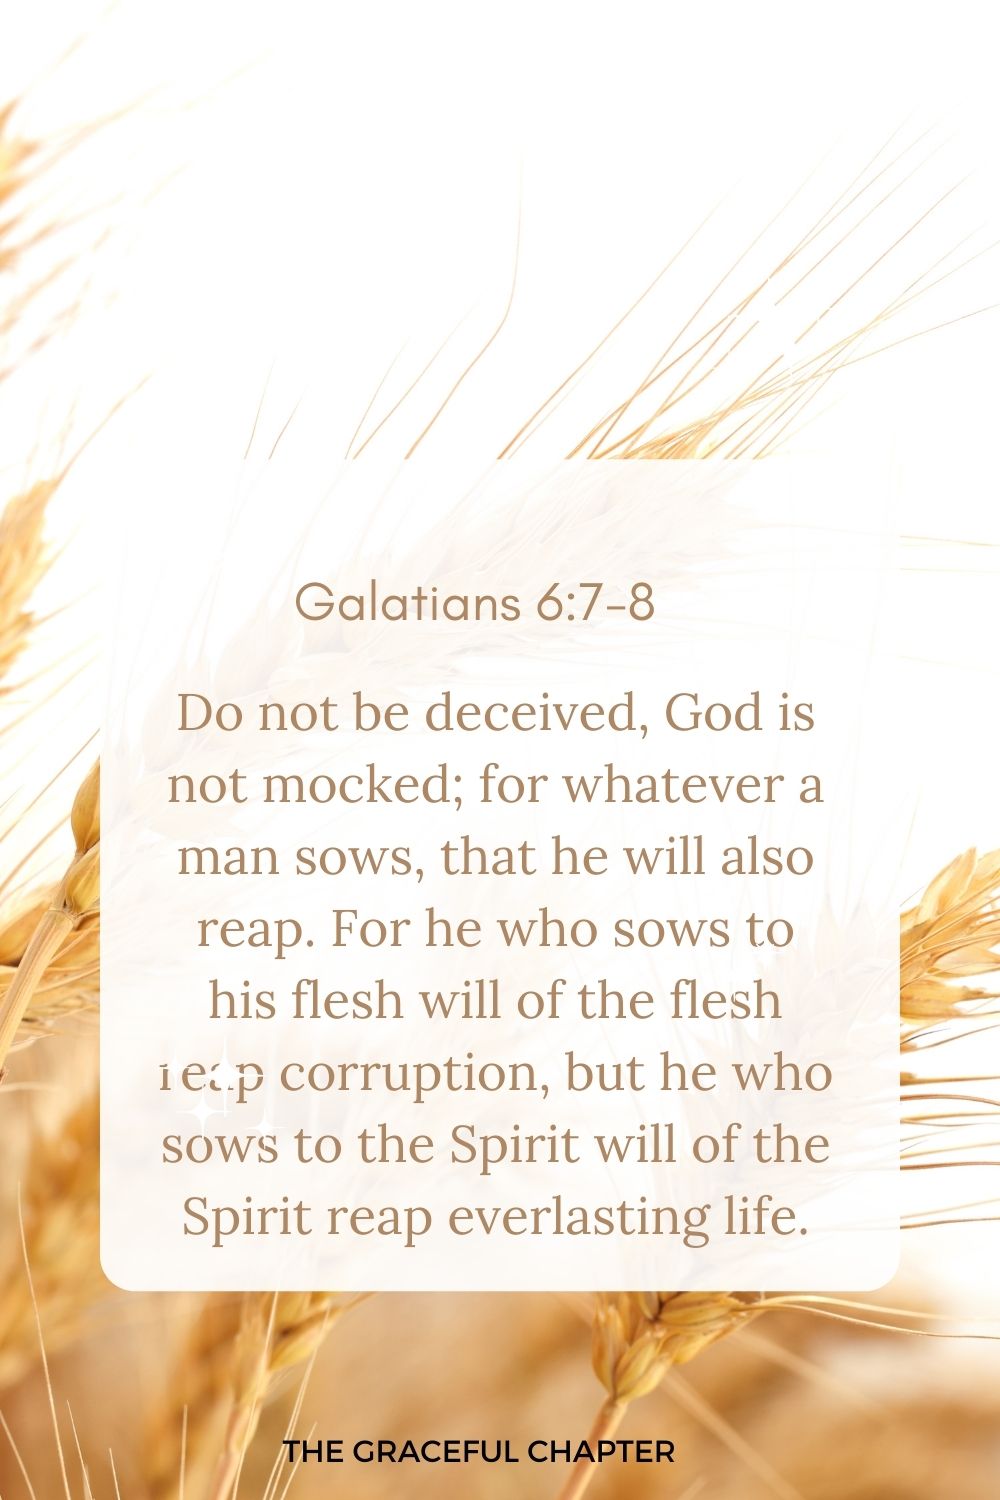 Do not be deceived, God is not mocked; for whatever a man sows, that he will also reap. For he who sows to his flesh will of the flesh reap corruption, but he who sows to the Spirit will of the Spirit reap everlasting life. Galatians 6:7-8